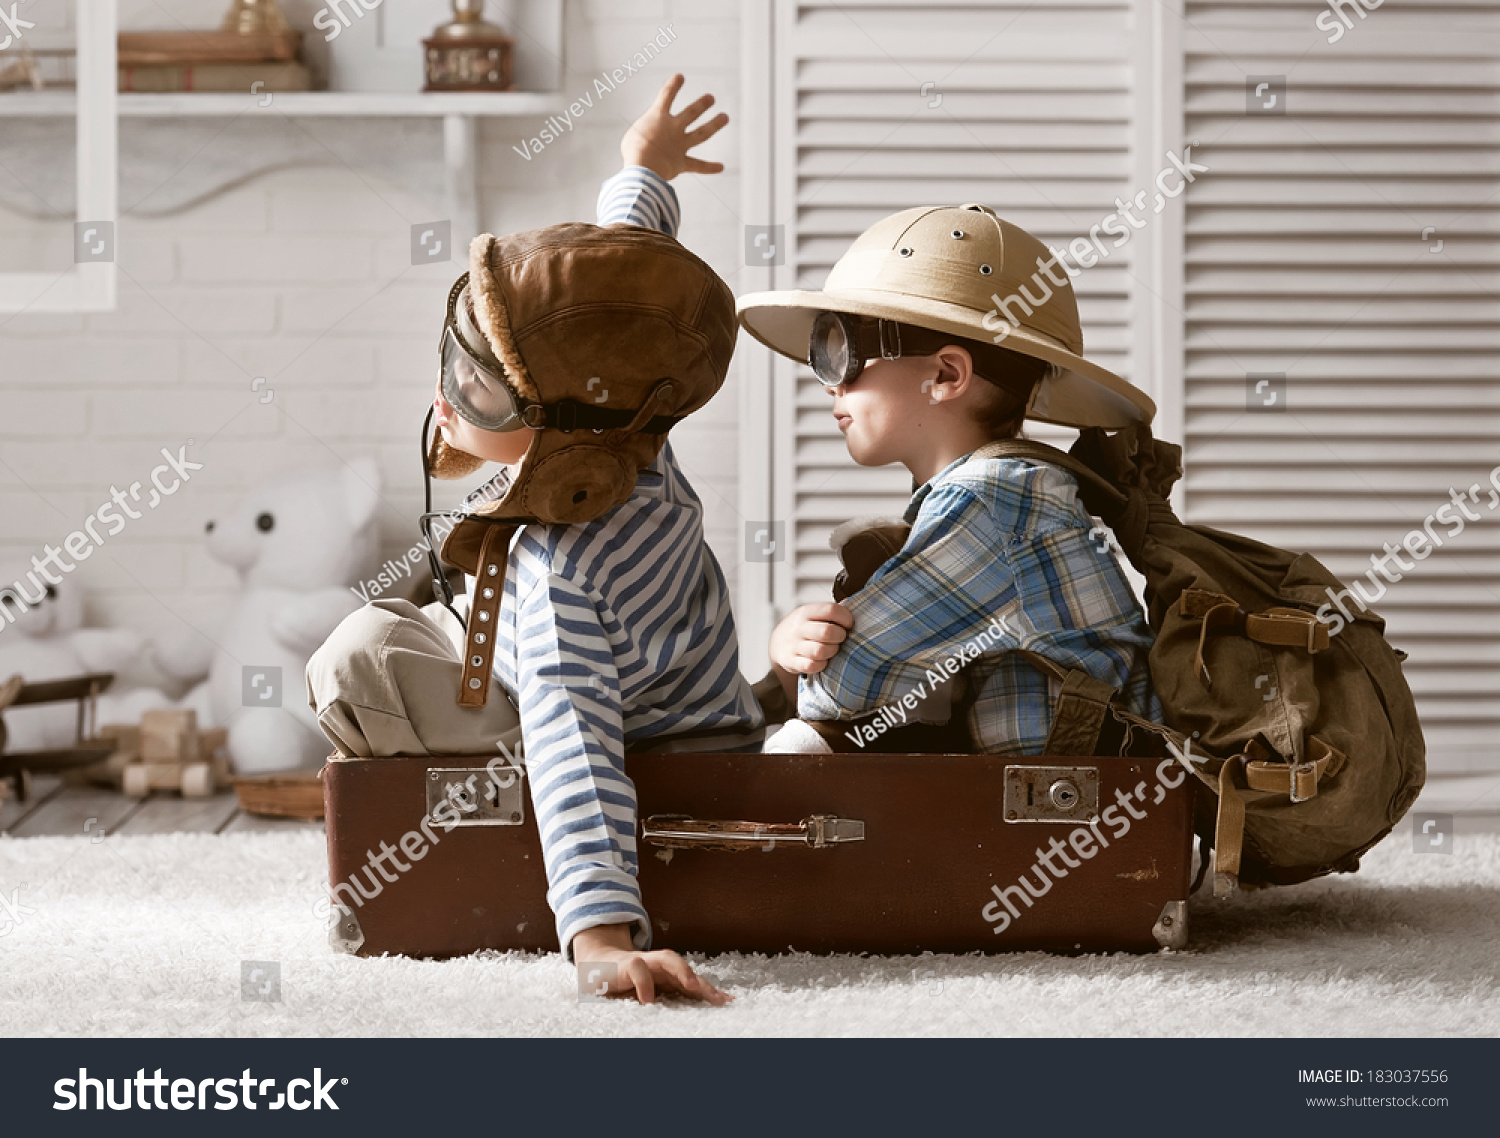 Two boys in the form of an aircraft pilot and traveler playing in her room #183037556